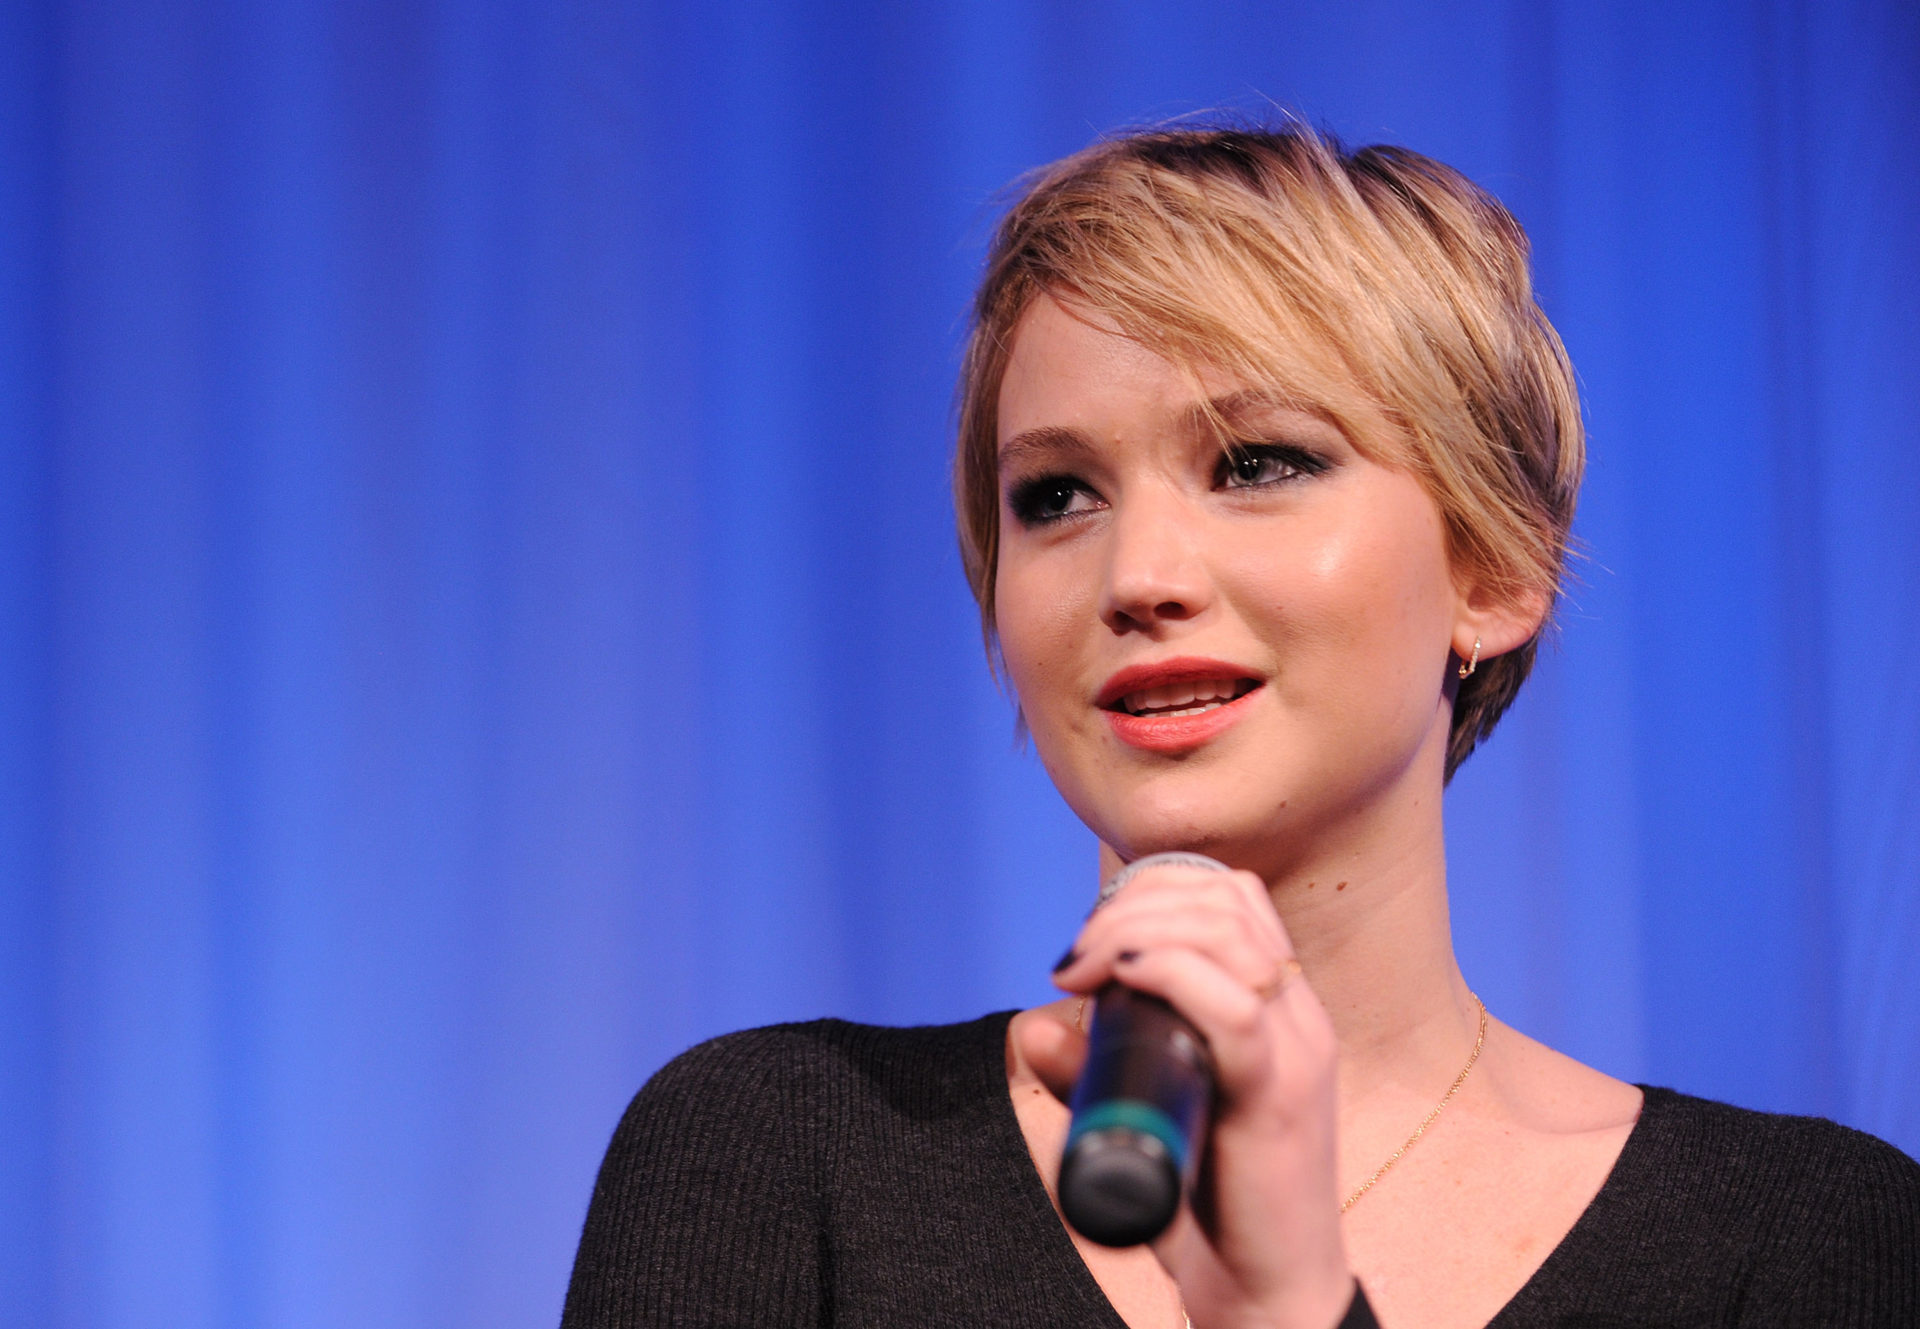 The Academy Of Motion Picture Arts And Sciences Hosts An Official Academy Members Screening Of "American Hustle"